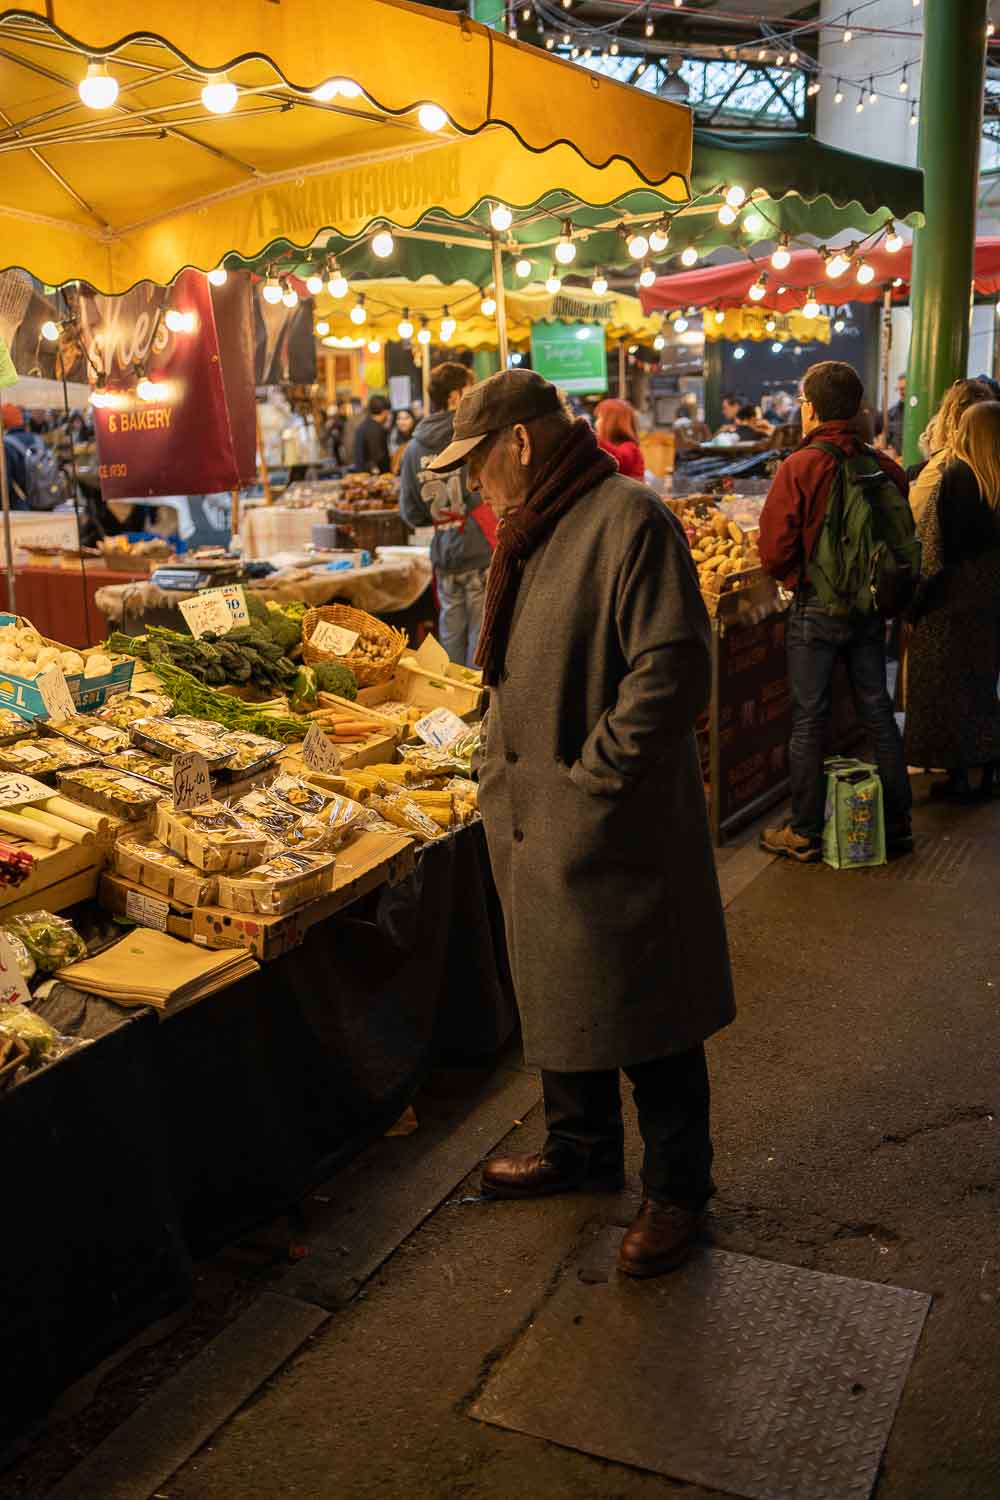 check. A tourist? A regular? Either way, I think they know what they're looking for and this isn't it. A person in an overcoat, baseball cap and polished brown shoes leans slightly forwards as they inspect some groceries for sale